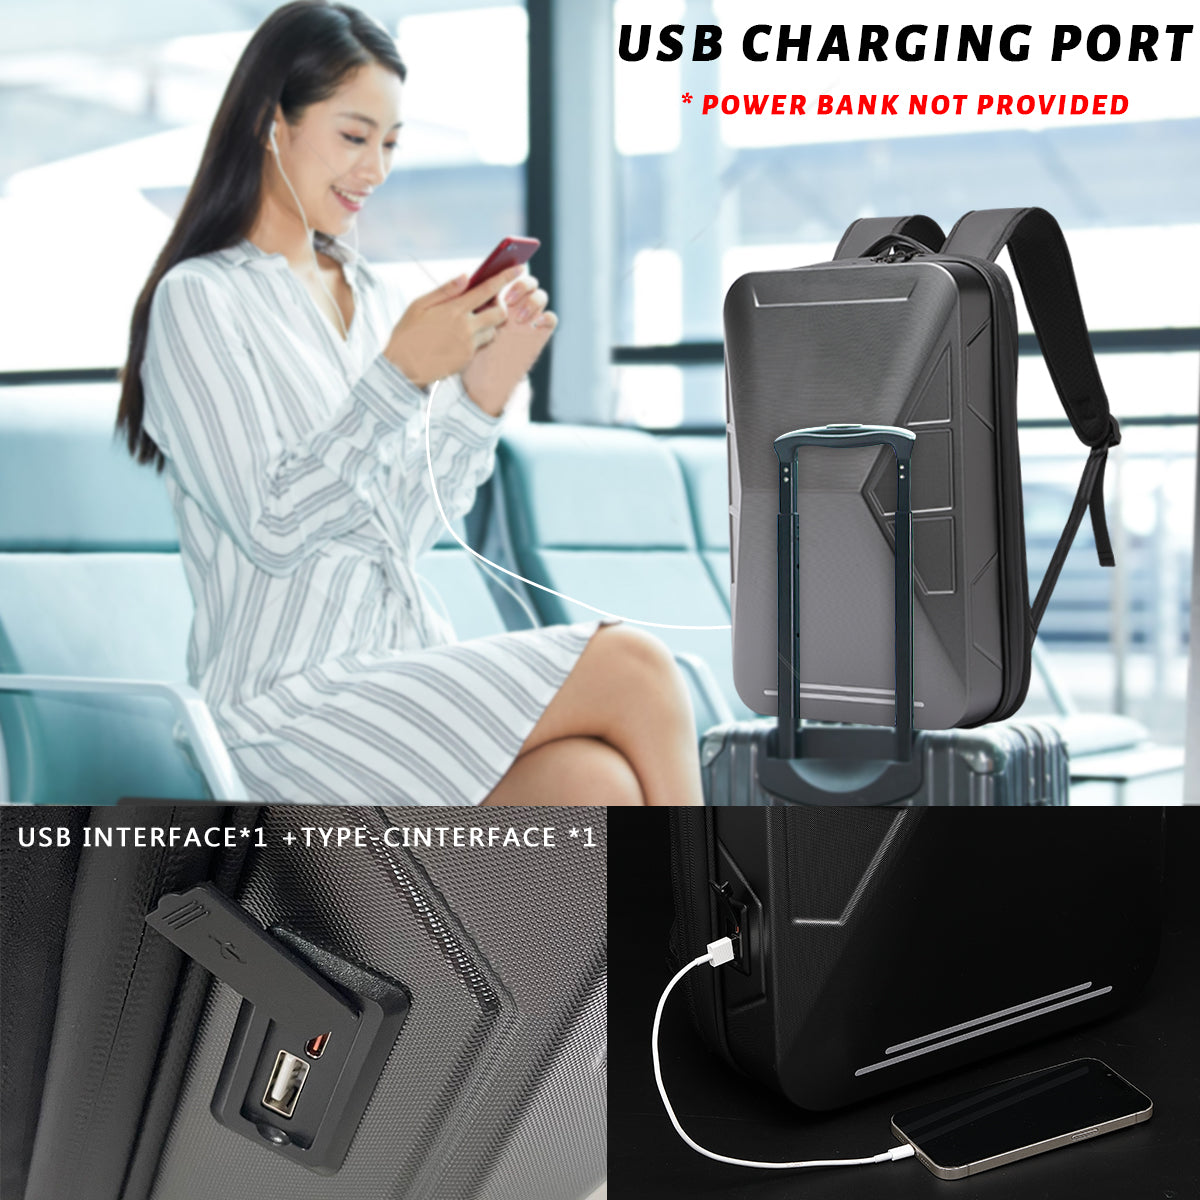 Cyberbackpack Expandable & Functional Laptop Bag for Business, Gaming, and Travel – Durable, Stylish, and Secure, Equipped with USB Charging Port